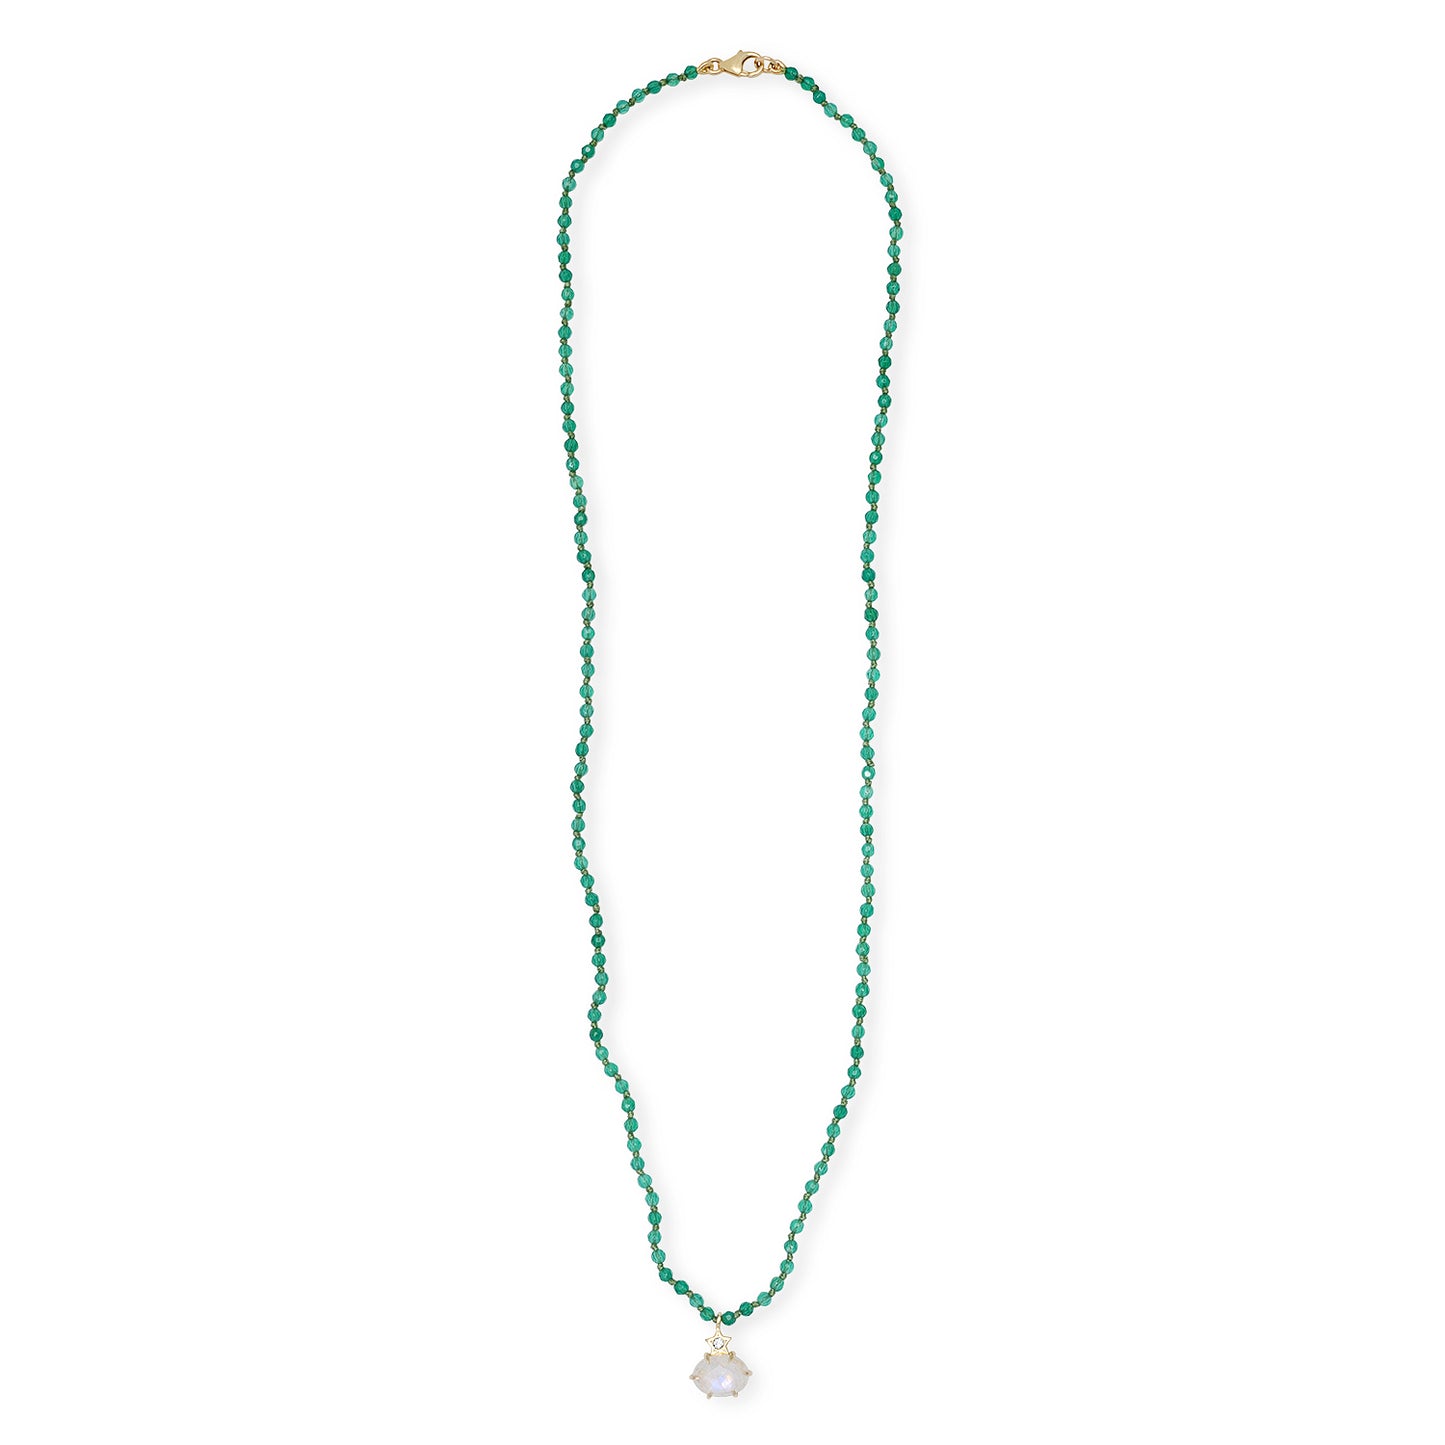 Green Onyx Beaded Necklace